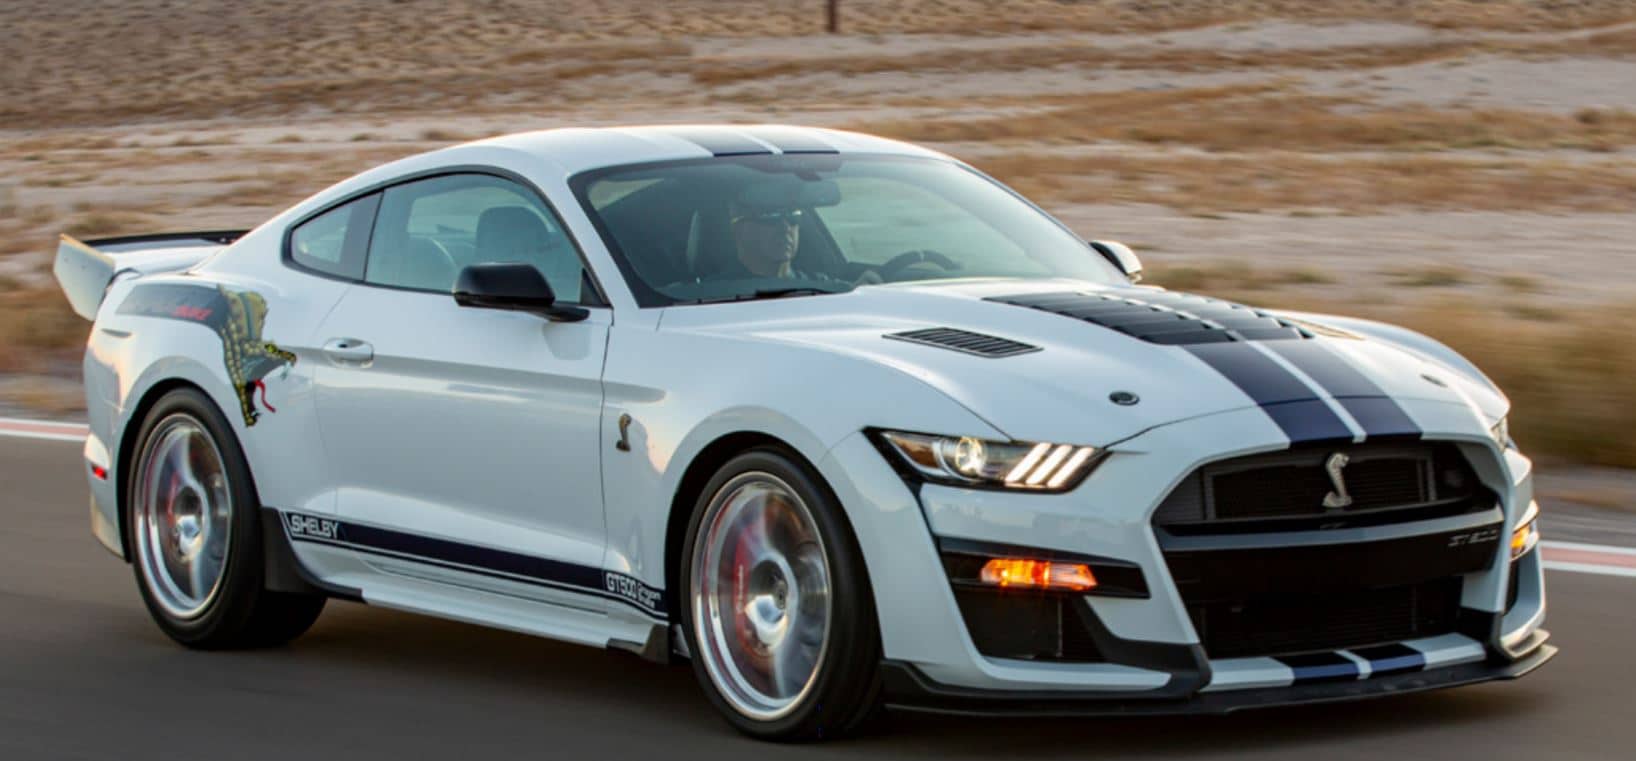 2020 SHELBY GT500 DRAGON SNAKE CONCEPT